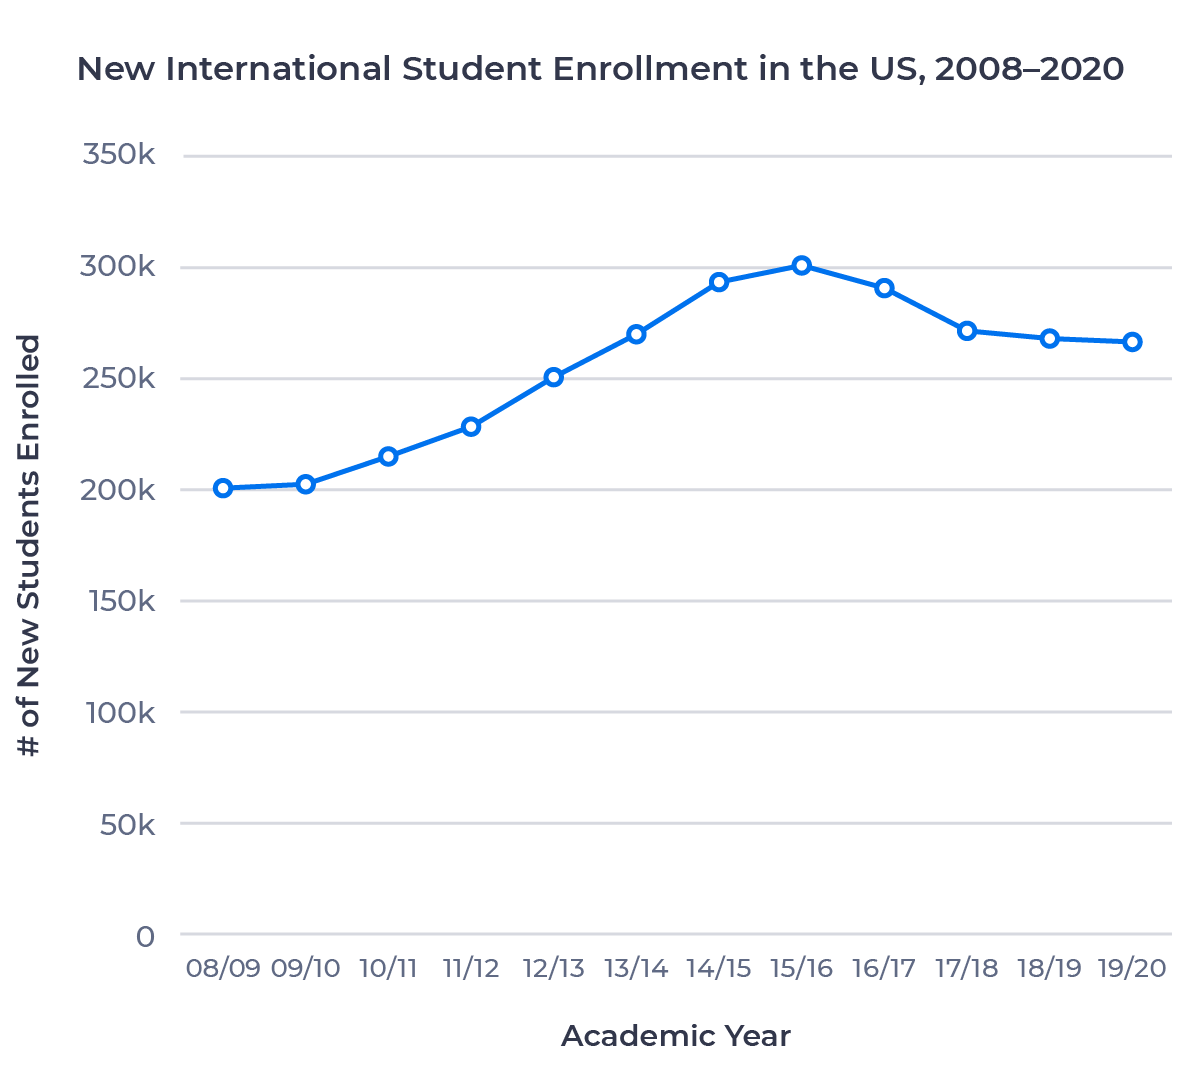 Line chart showing total new international student enrollment in the US from the 08/09 to 19/20 academic years. Examined in detail below.